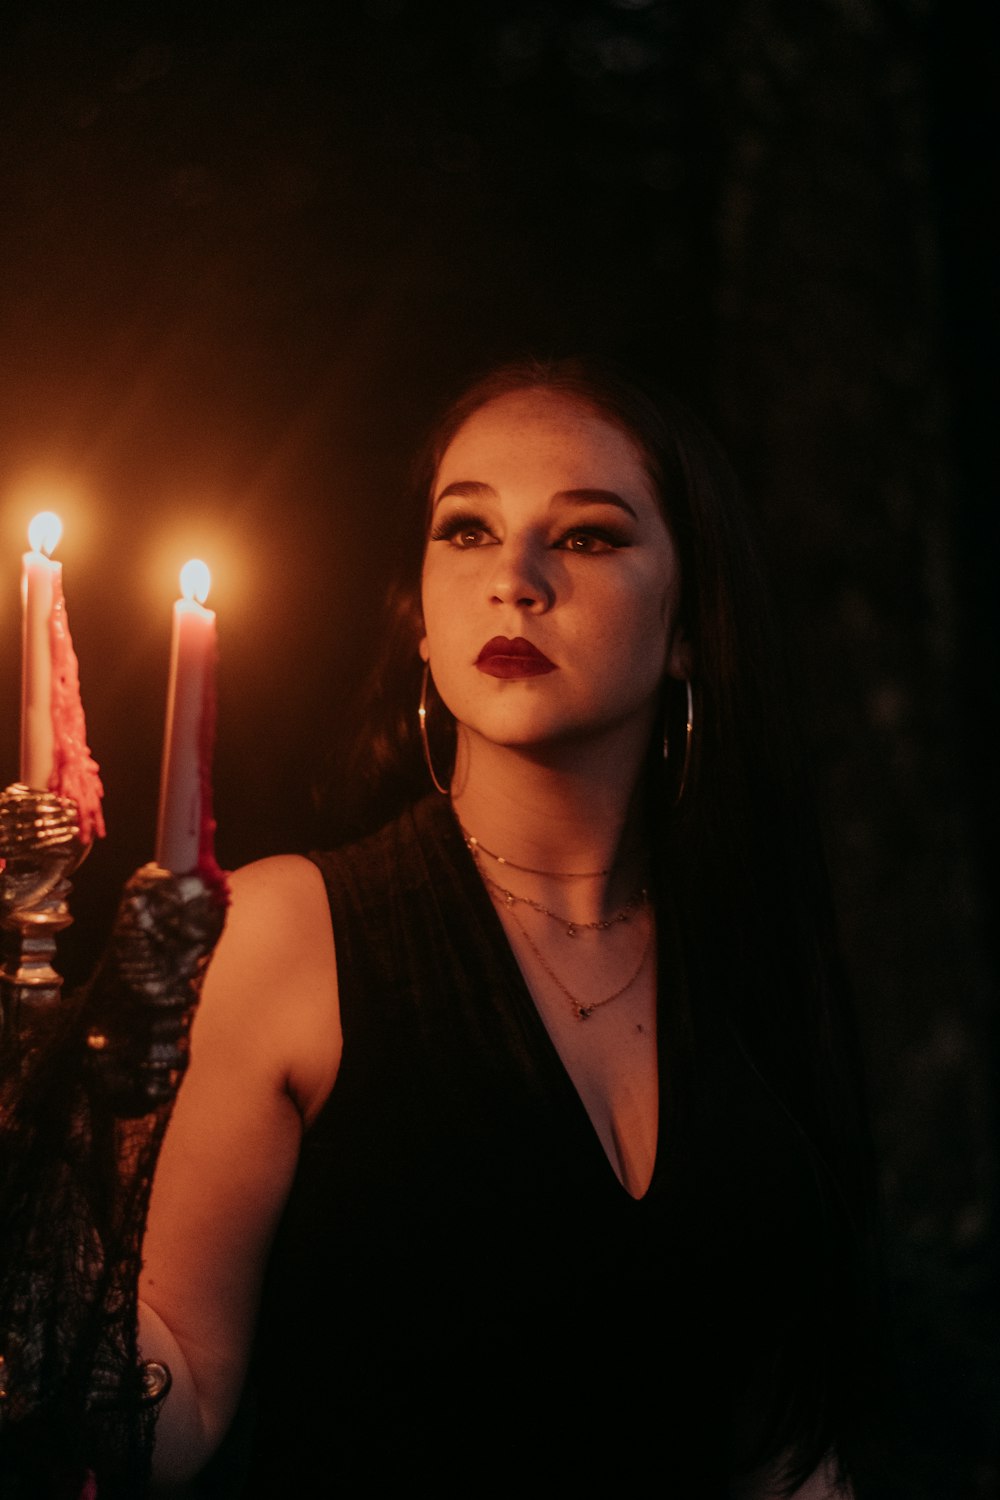 a person with a necklace and a black dress with candles in the background